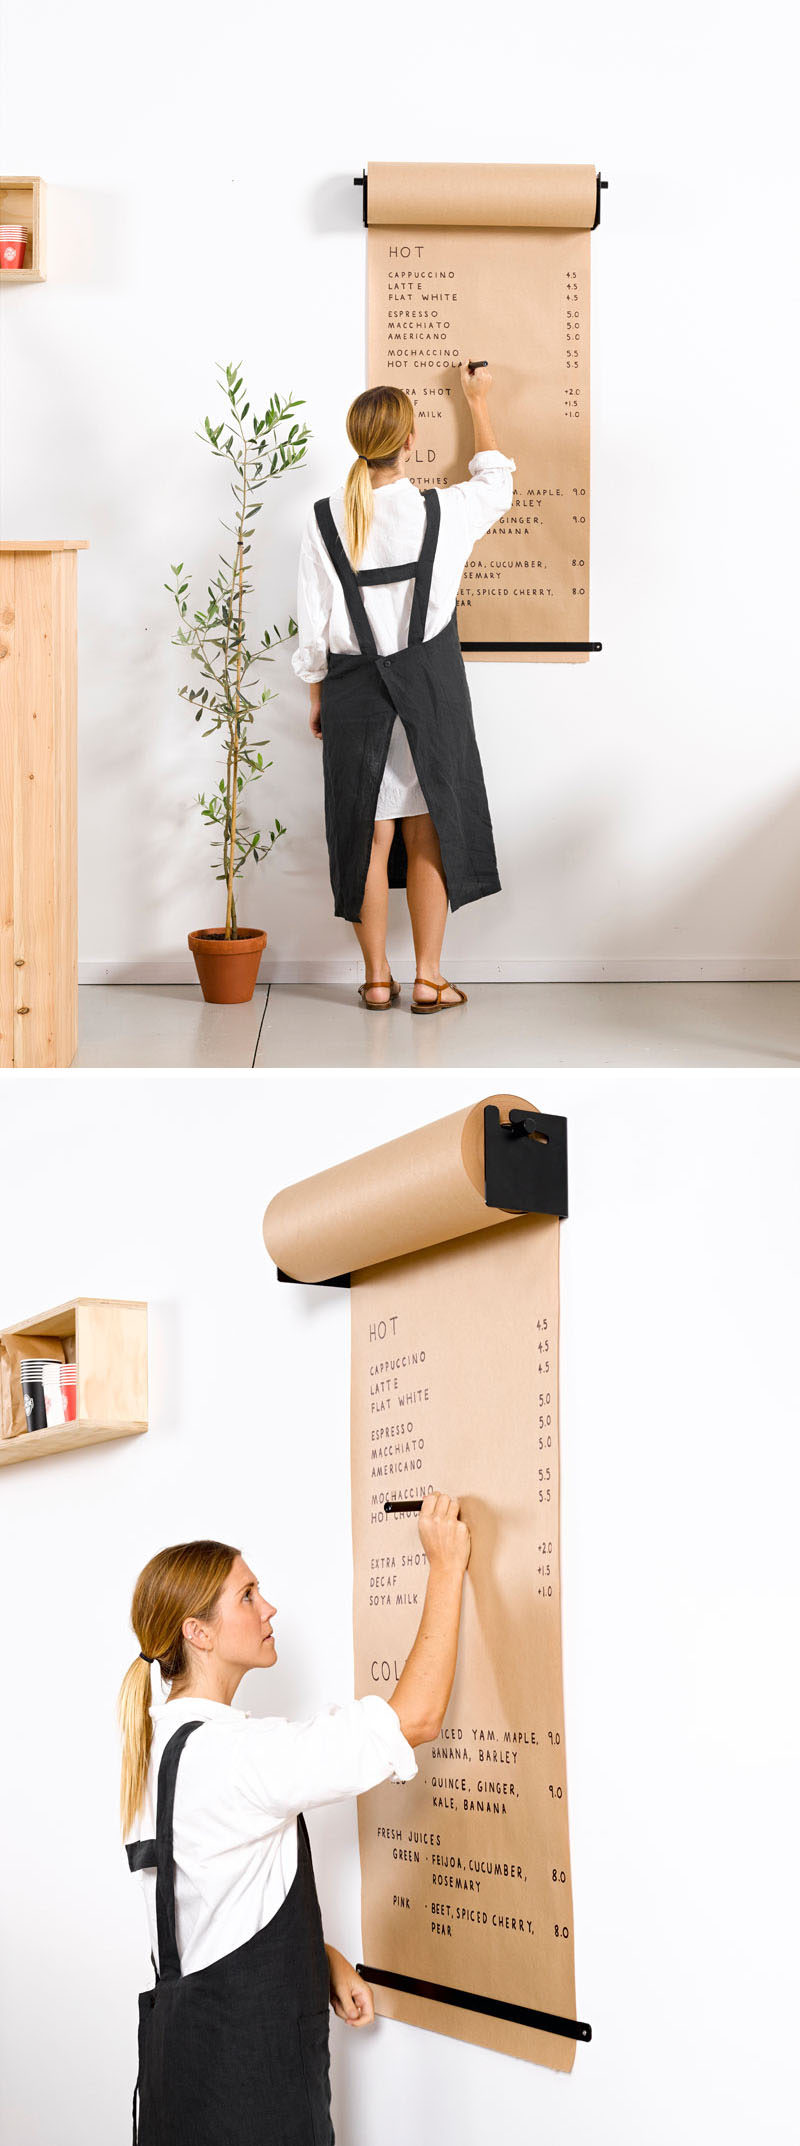 Wall Decor Idea - Install A Paper Roll Holder To Create A Fun Place To Write Lists Or Let Kids Draw